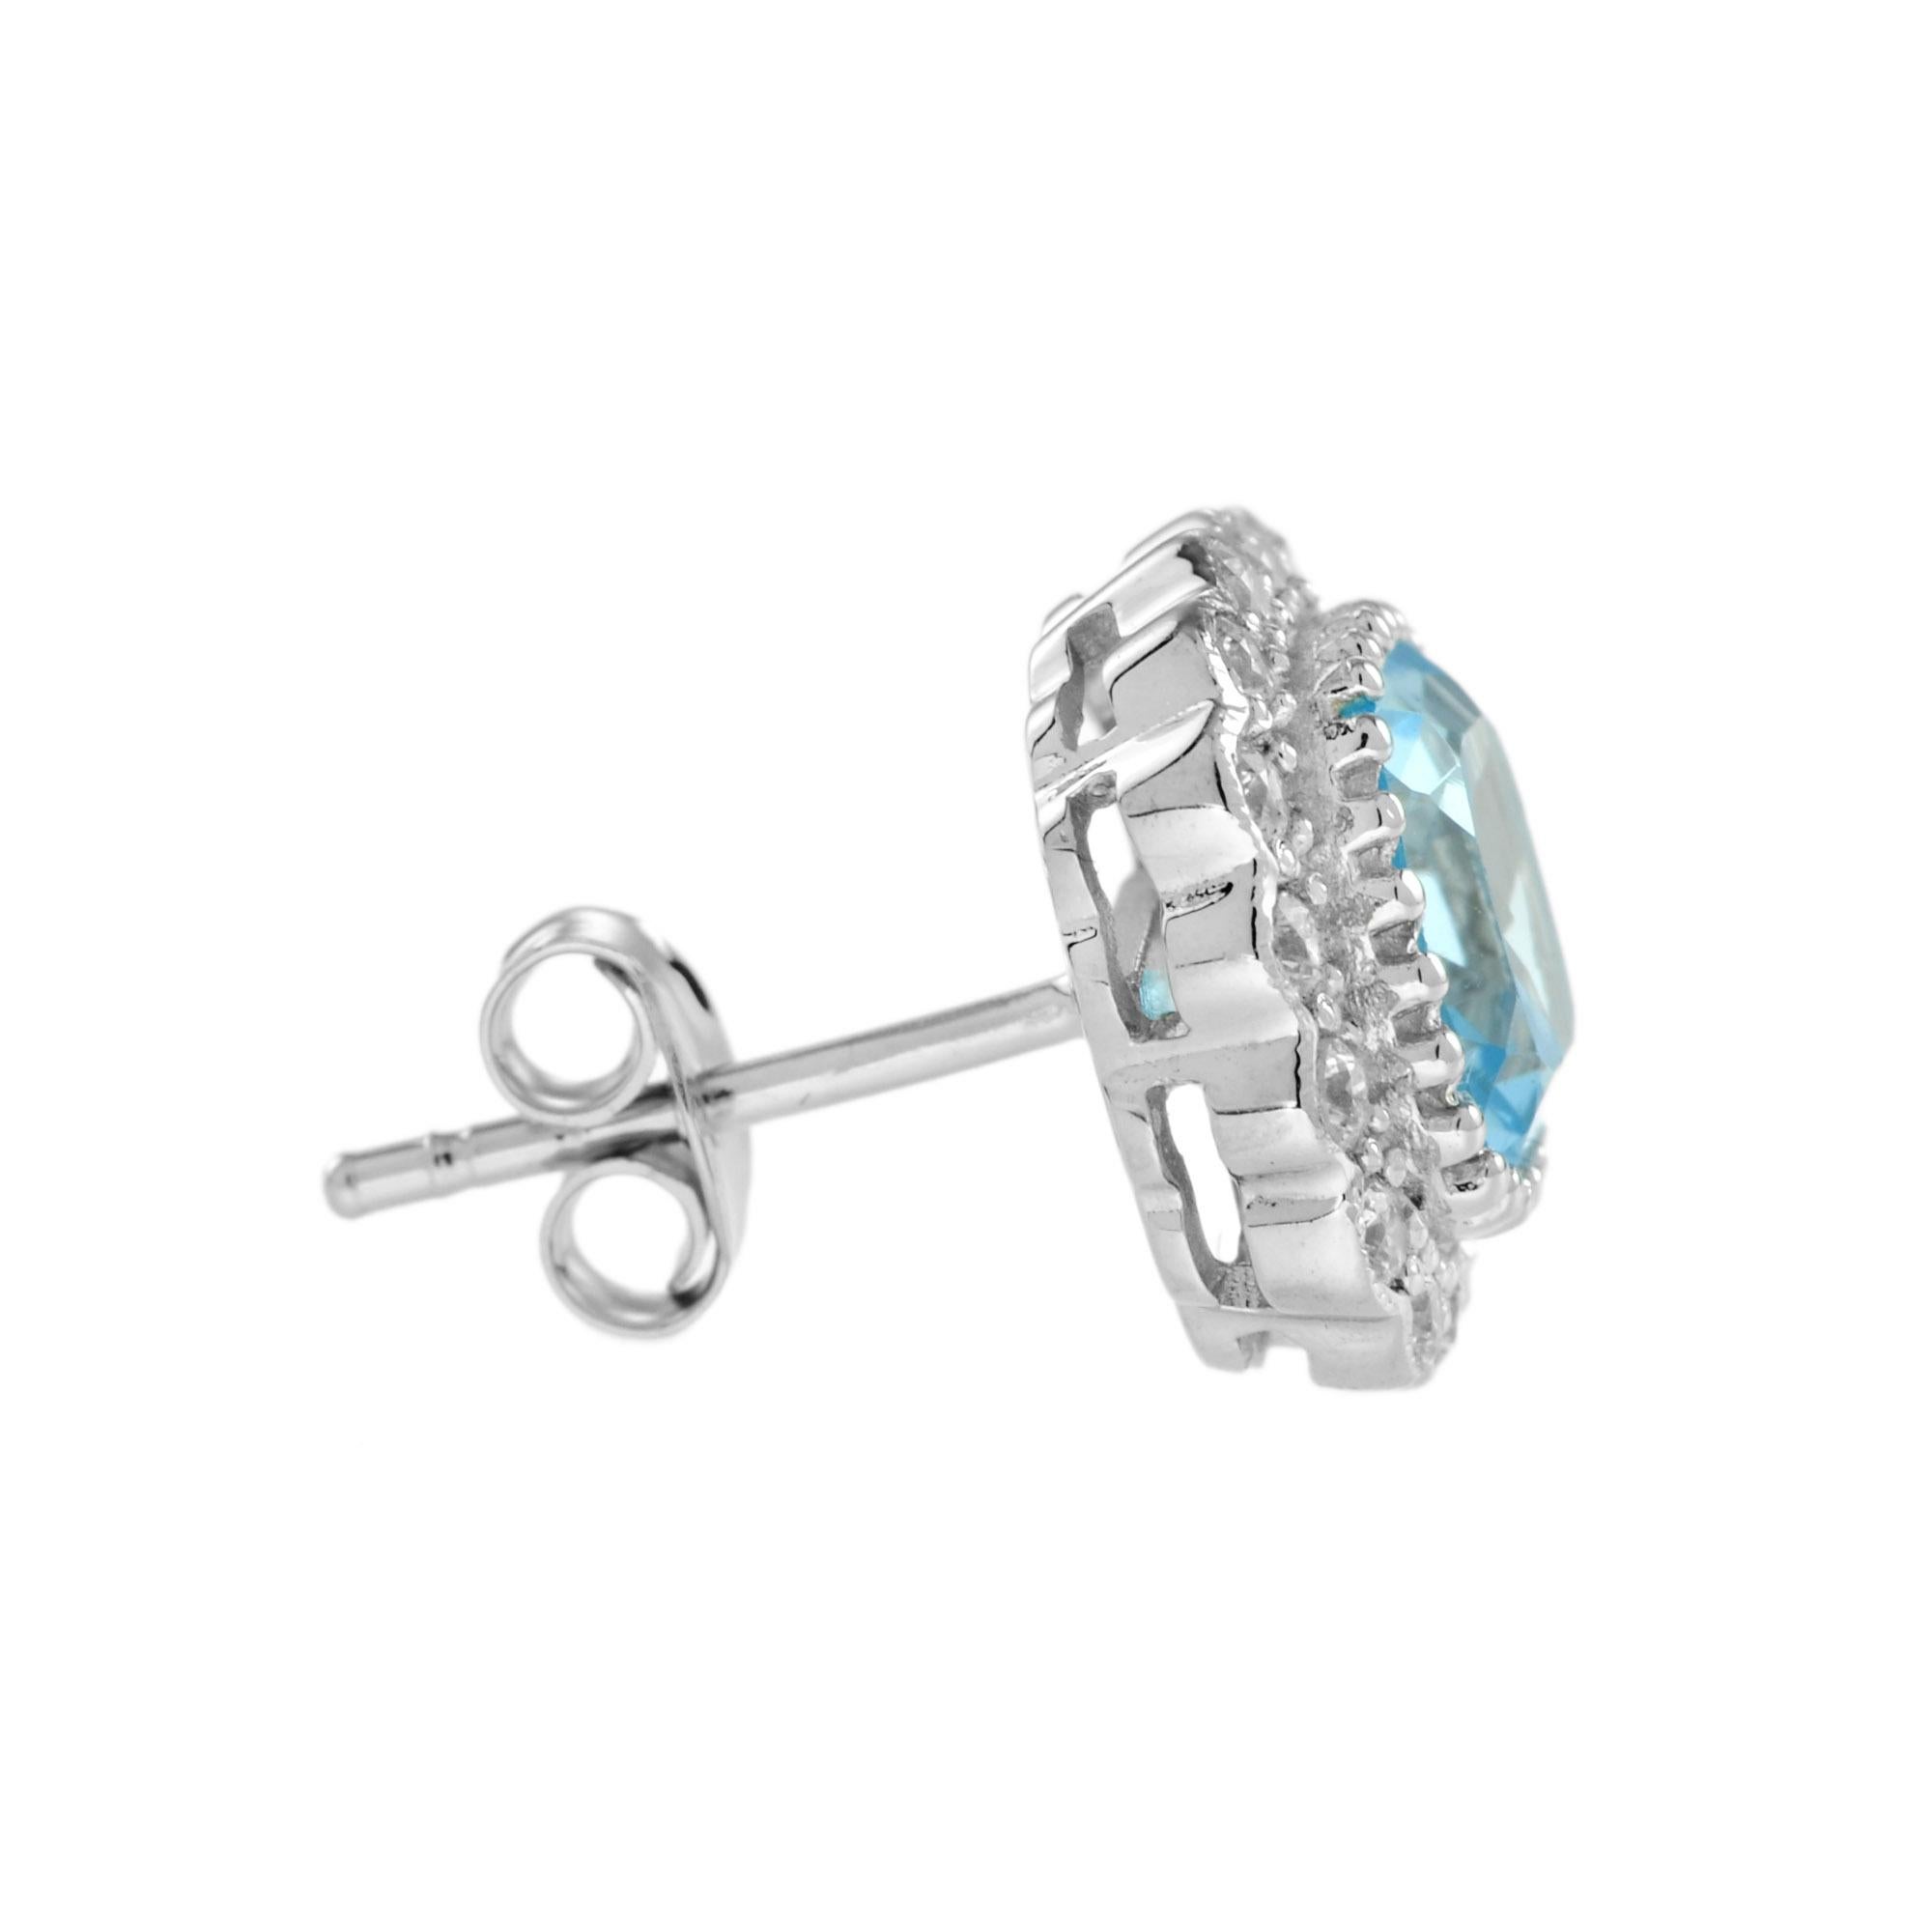 This gorgeous 14k white gold halo earrings feature a total of 3.80 carat cushion-cut blue topaz  surrounded by a halo of diamonds. An effortless upgrade to your accessary wardrobe. Wear it with our same design pendant for your perfect look.